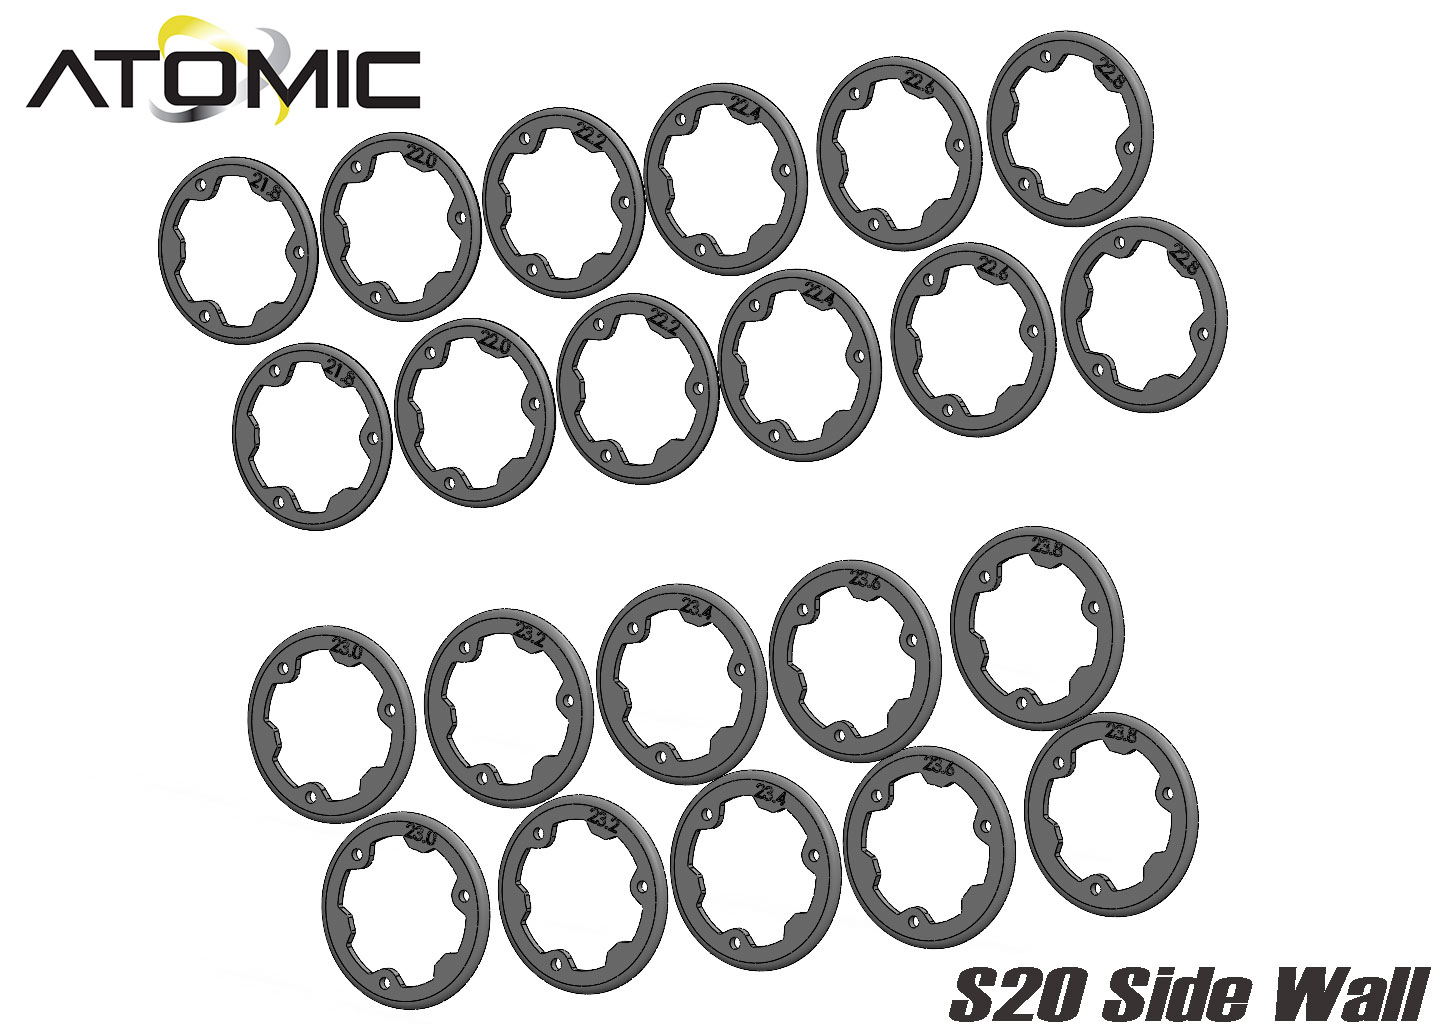 Side Wall Combo w/ Screw Set (11 pairs: 21.8 to 23.8mm)